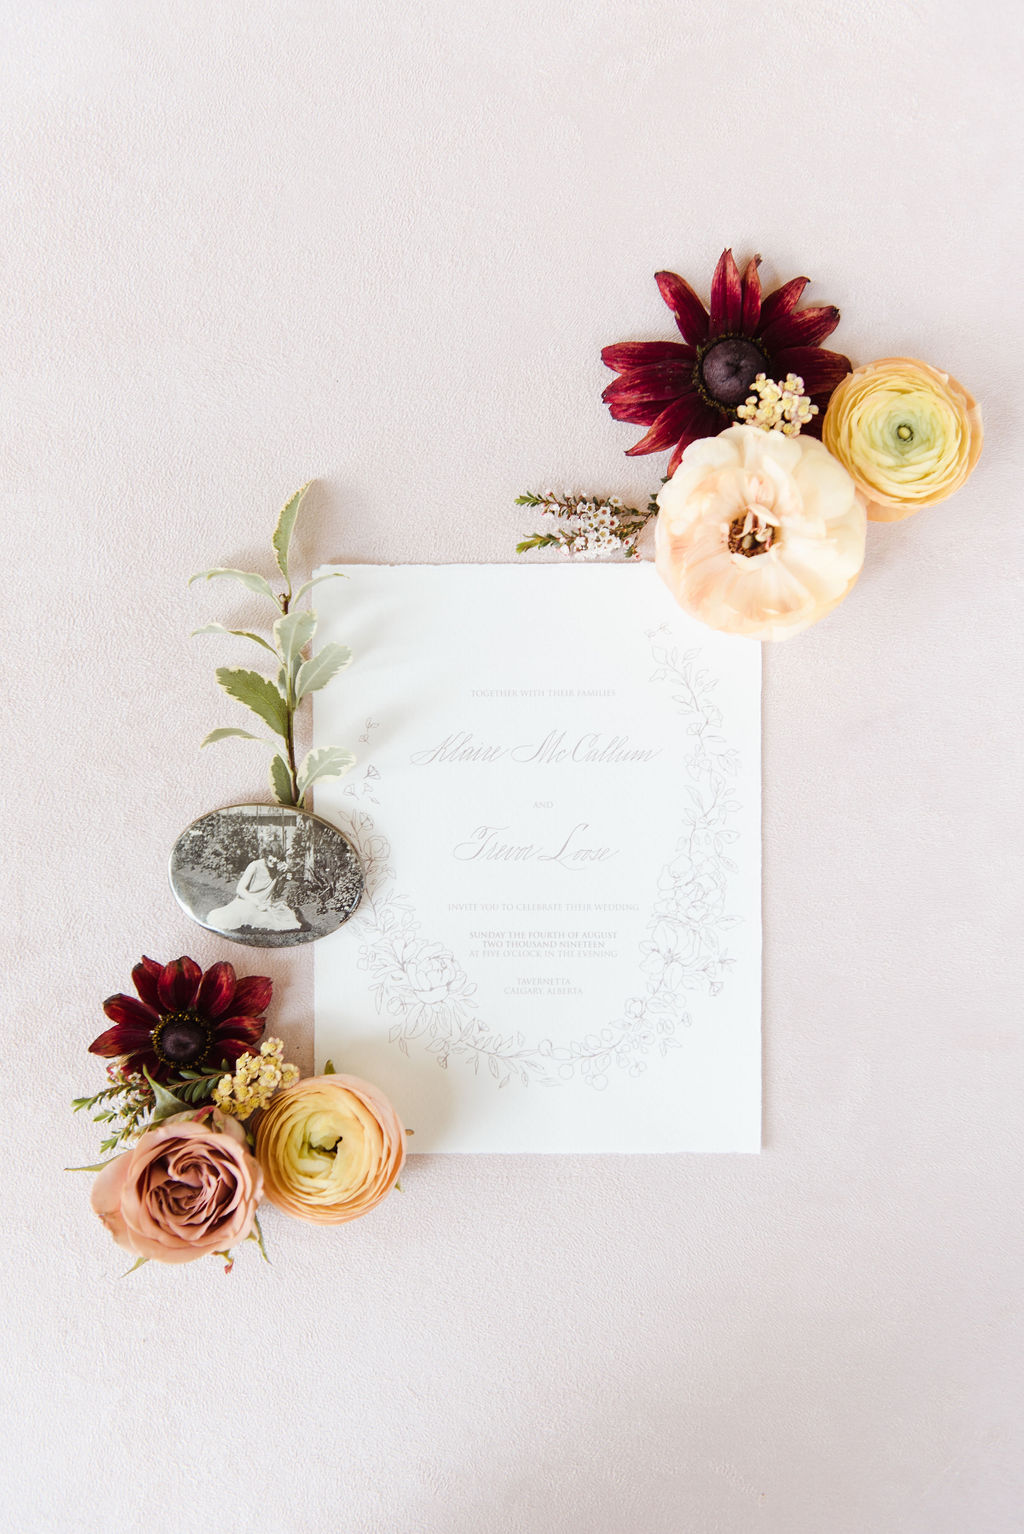 Romantic wedding stationery created by Debbie Wong designed styled with blush and tangerine florals